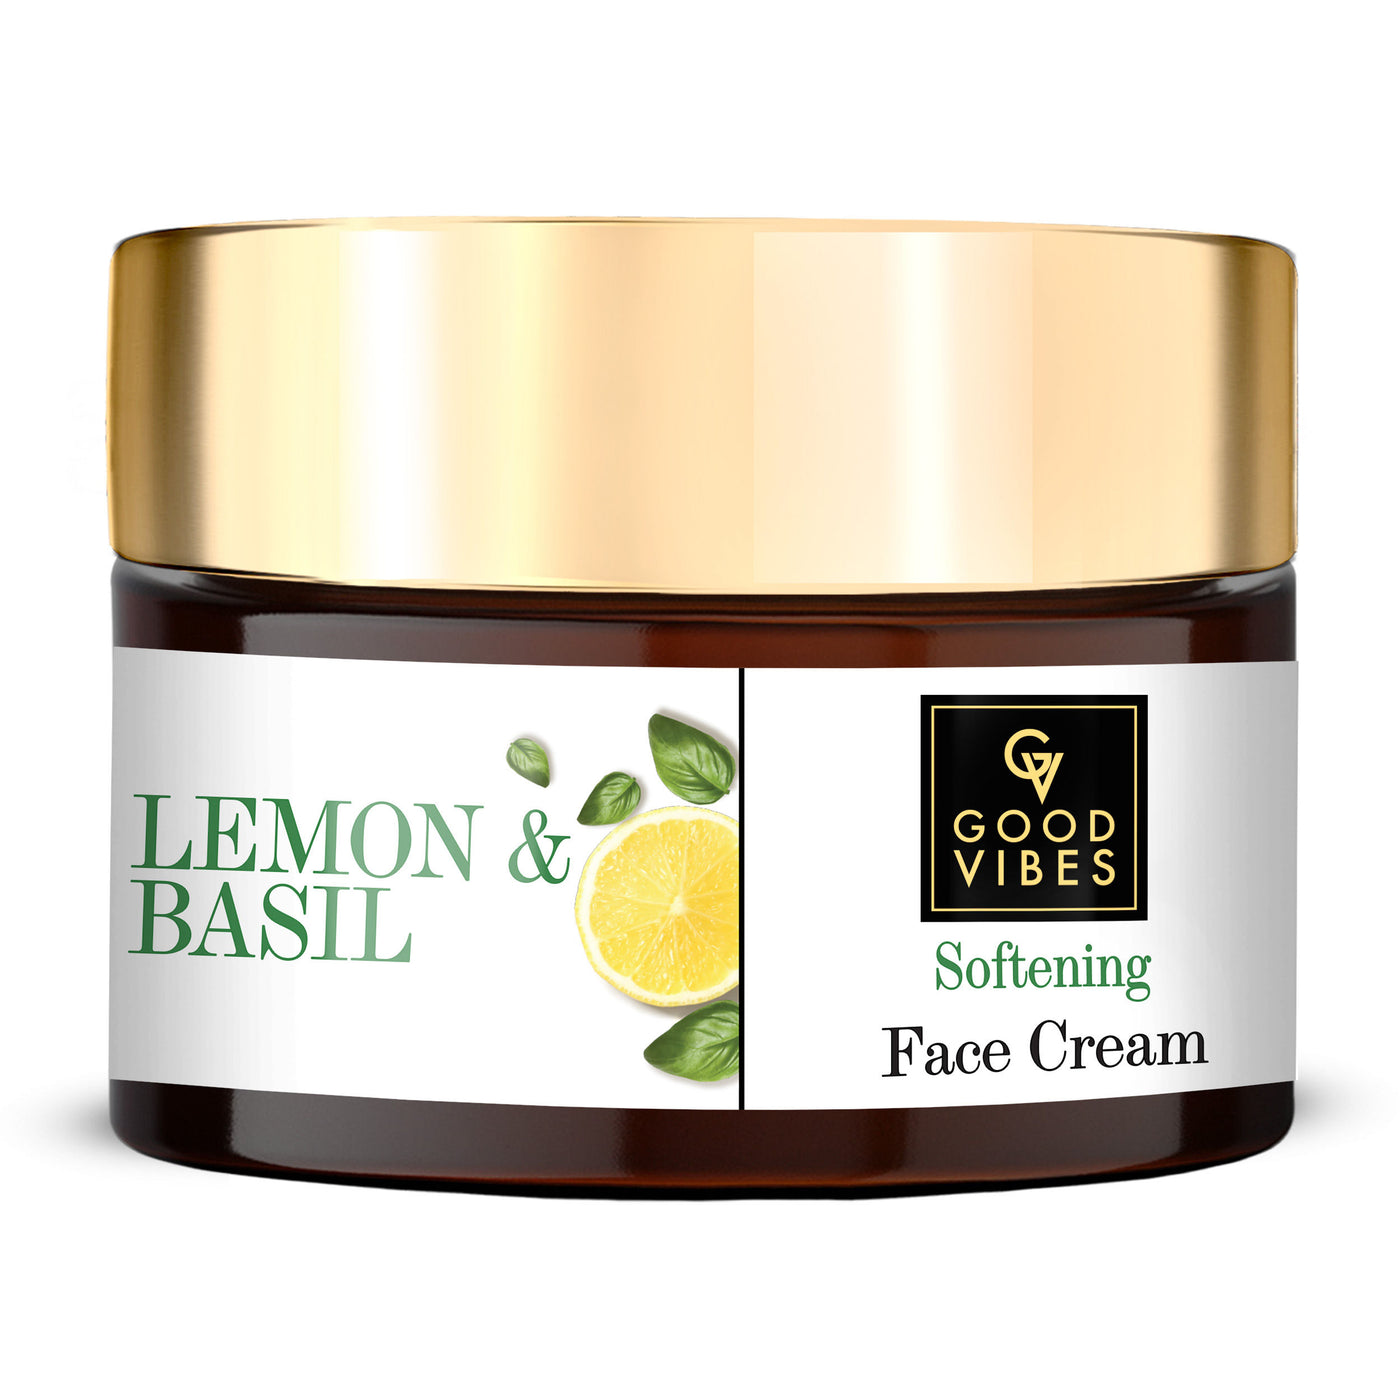 good-vibes-softening-face-cream-lime-and-basil-50-g-1-8